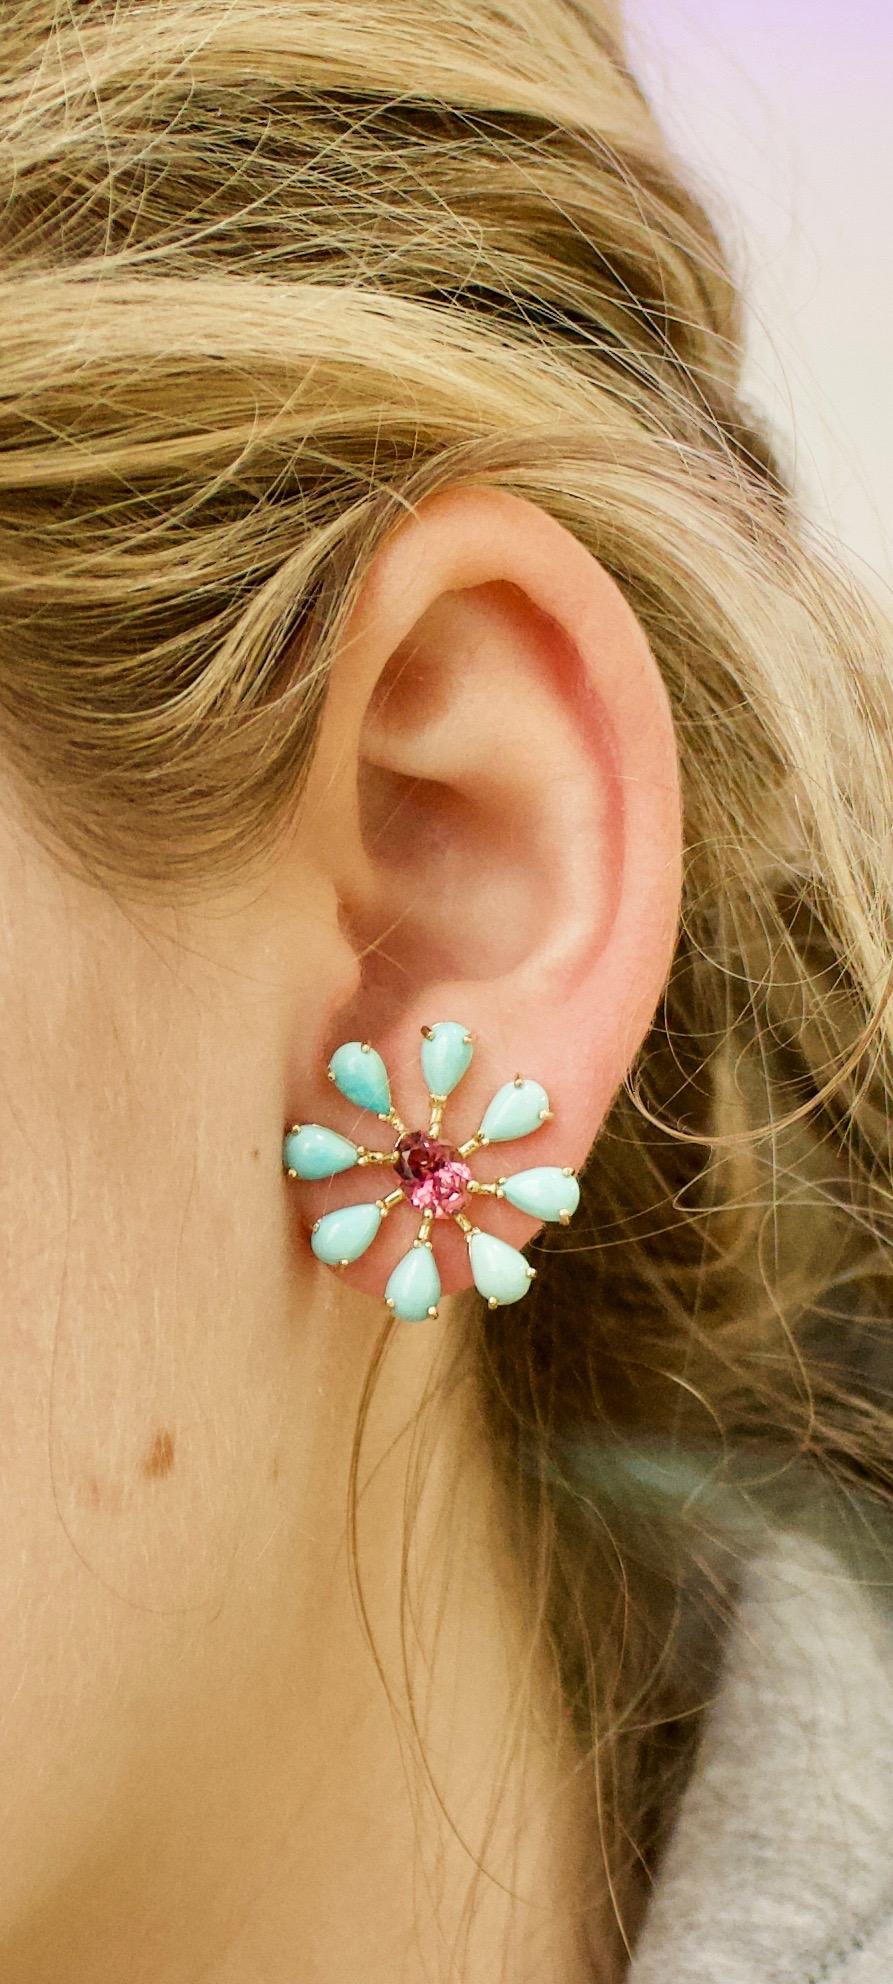 Sunburst Pink Tourmaline and Persian Turquoise Earrings in 18k Yellow Gold
Two Oval Pink Tourmalines Weigh 2.50 Carats Approximately   
16 Persian Turquoises 5 x 3 mm
Exclusively Designed For Jewels of Wailea  